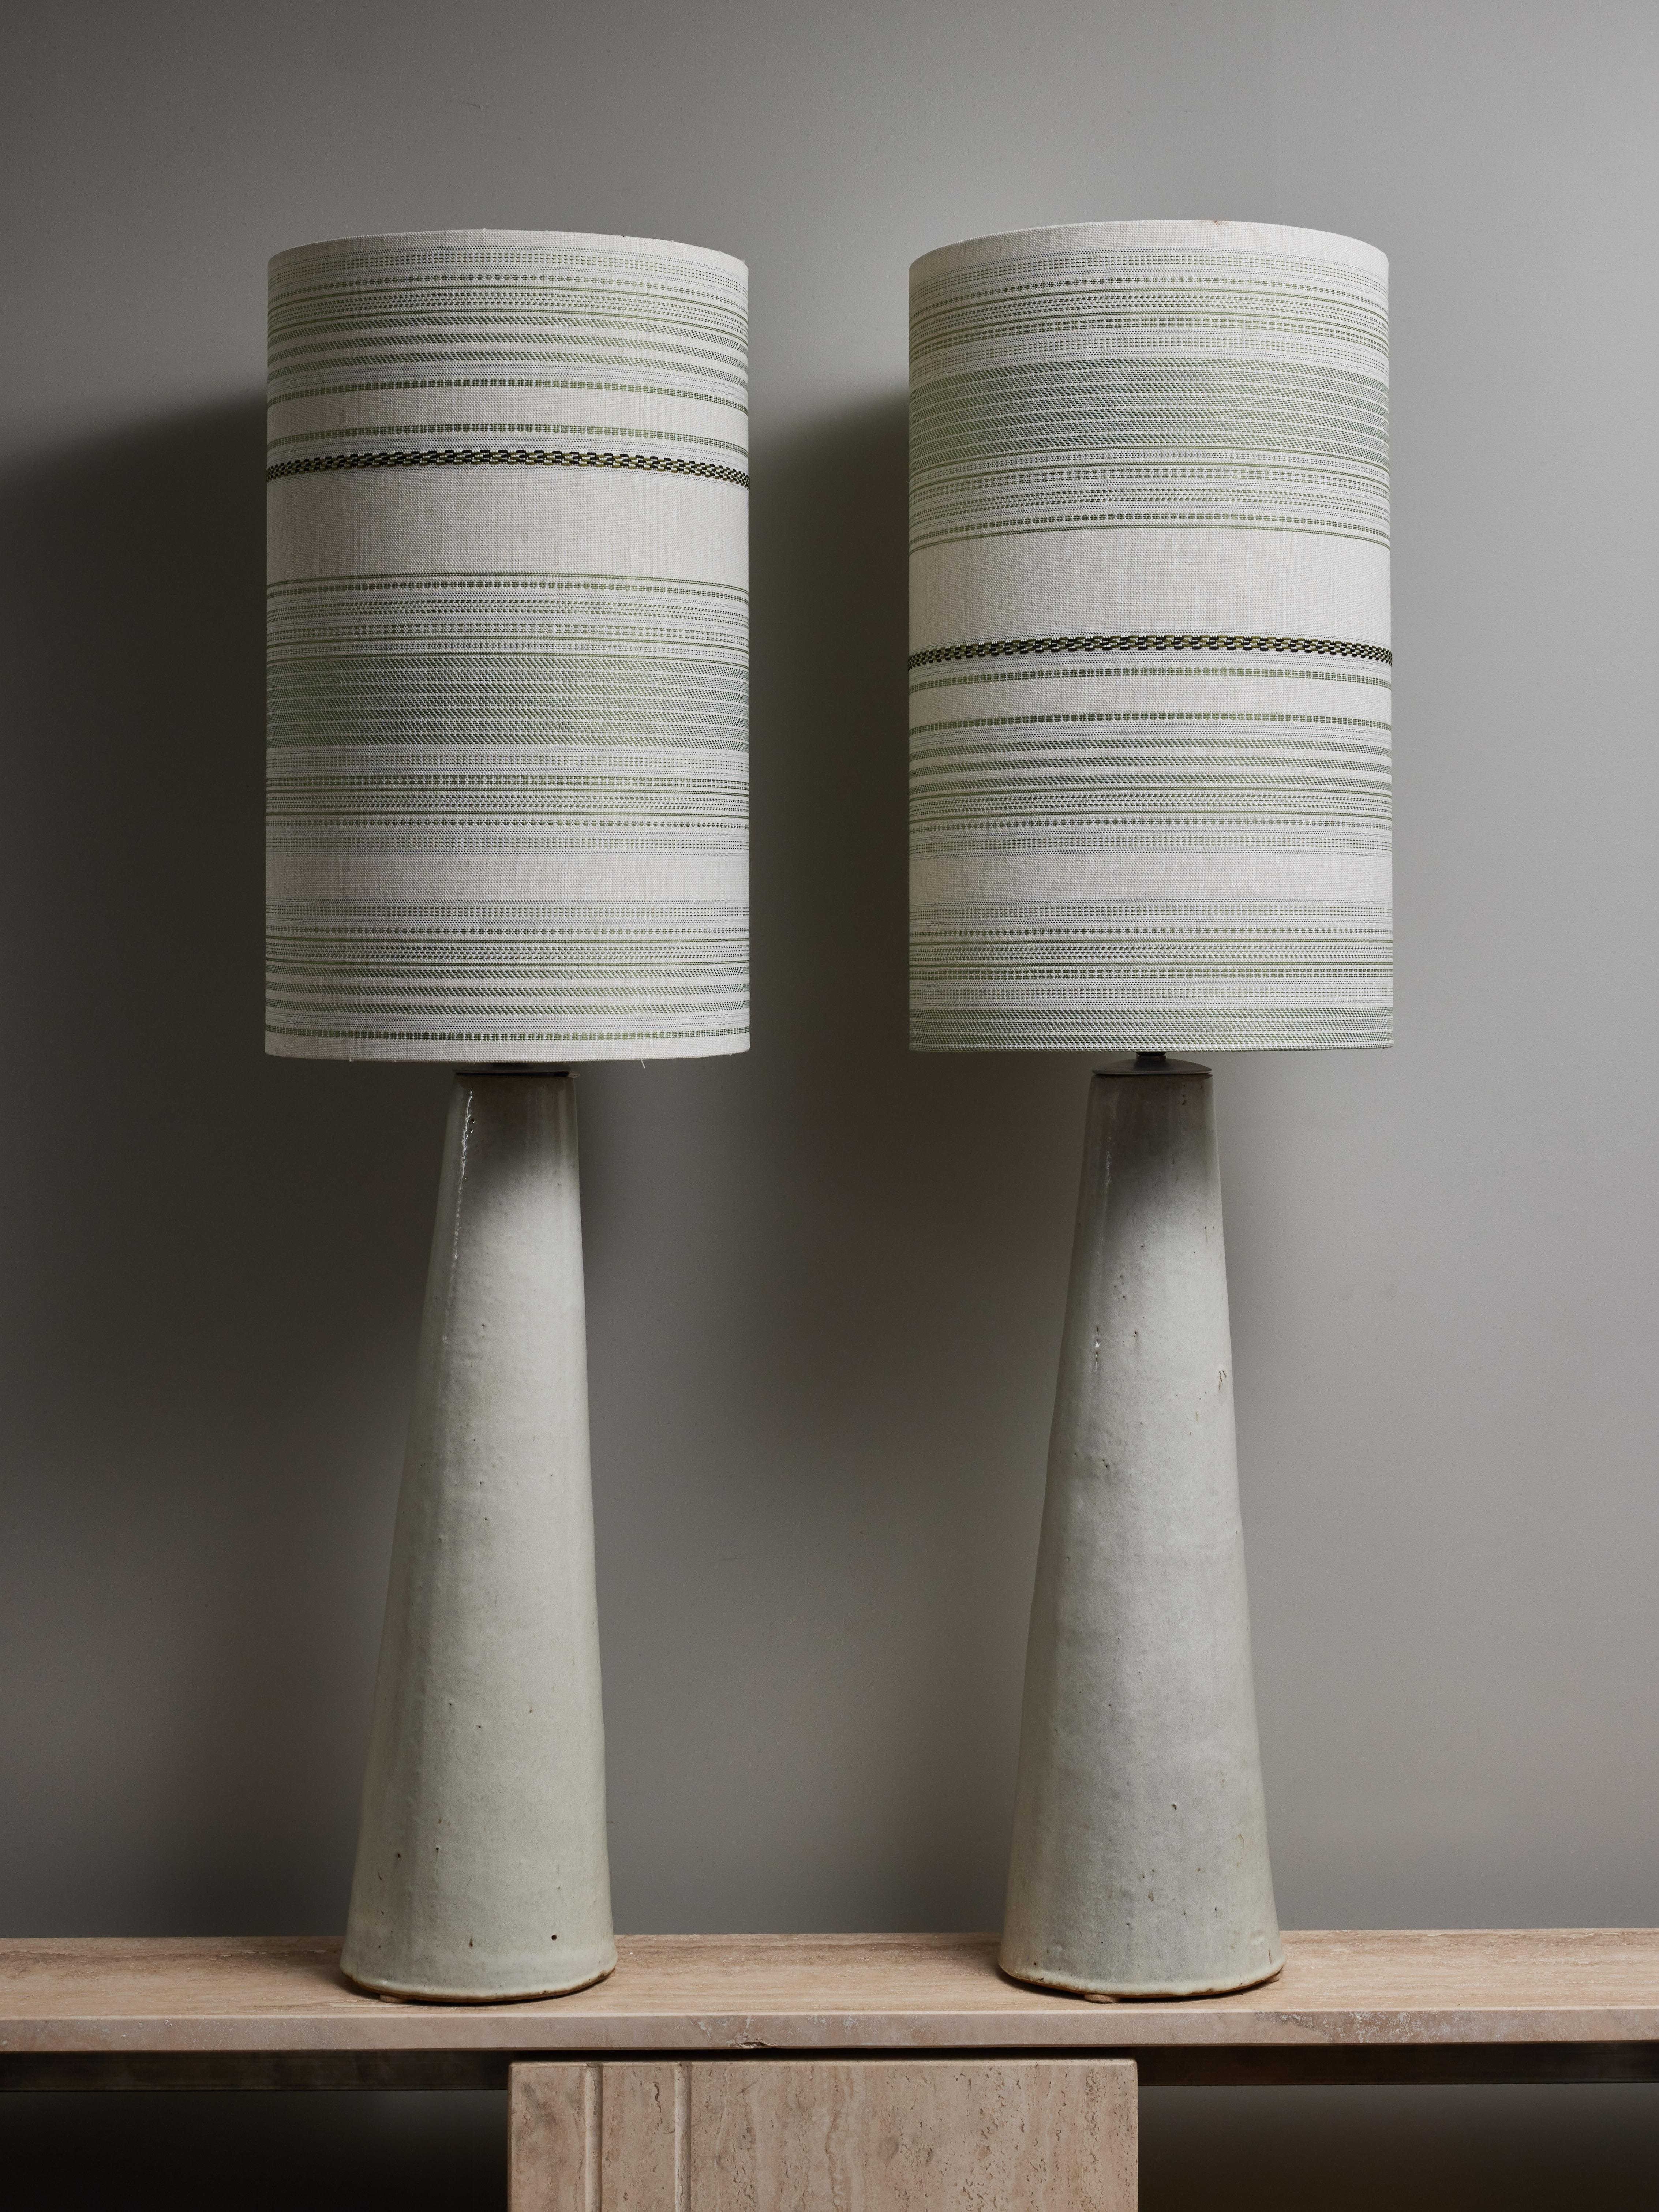 Pair of impressive tall ceramic table lamps, made of a single conical piece, glazed in an off white colour. Topped with a new lampshade.

Height with the shade: 140cm